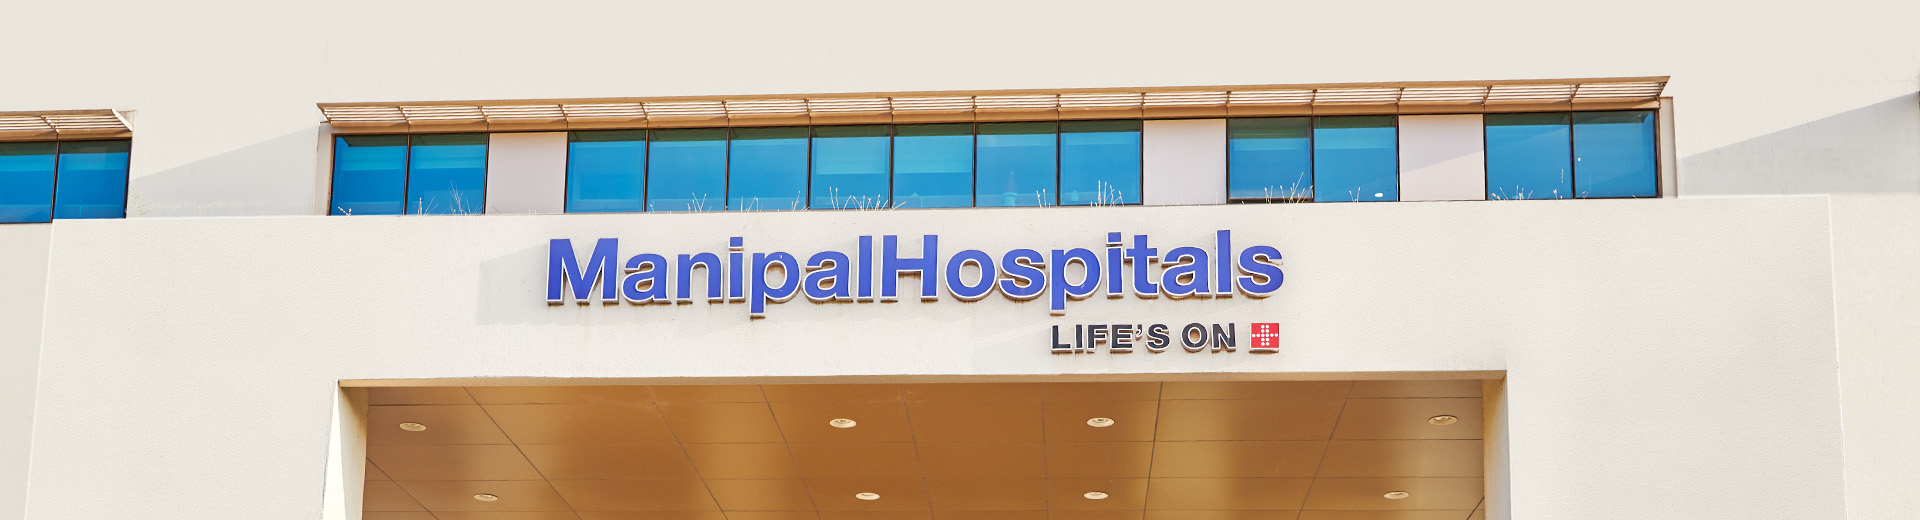 Corporate Social Responsibility (CSR) Policy -Manipal Hospitals Hebbal, Bangalore